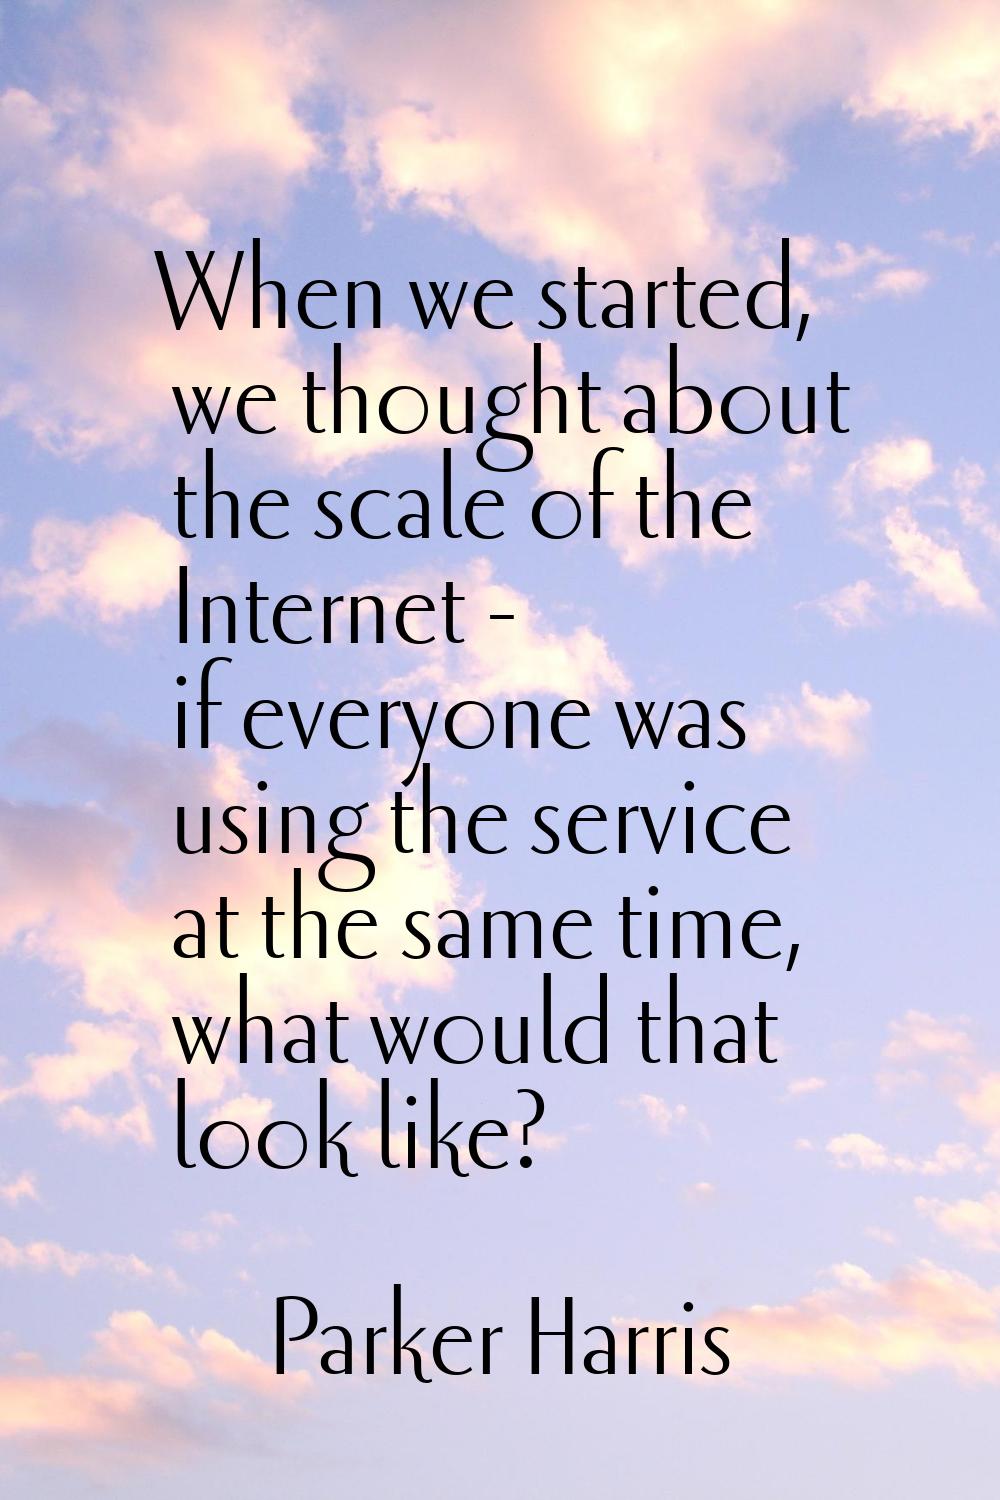 When we started, we thought about the scale of the Internet - if everyone was using the service at 